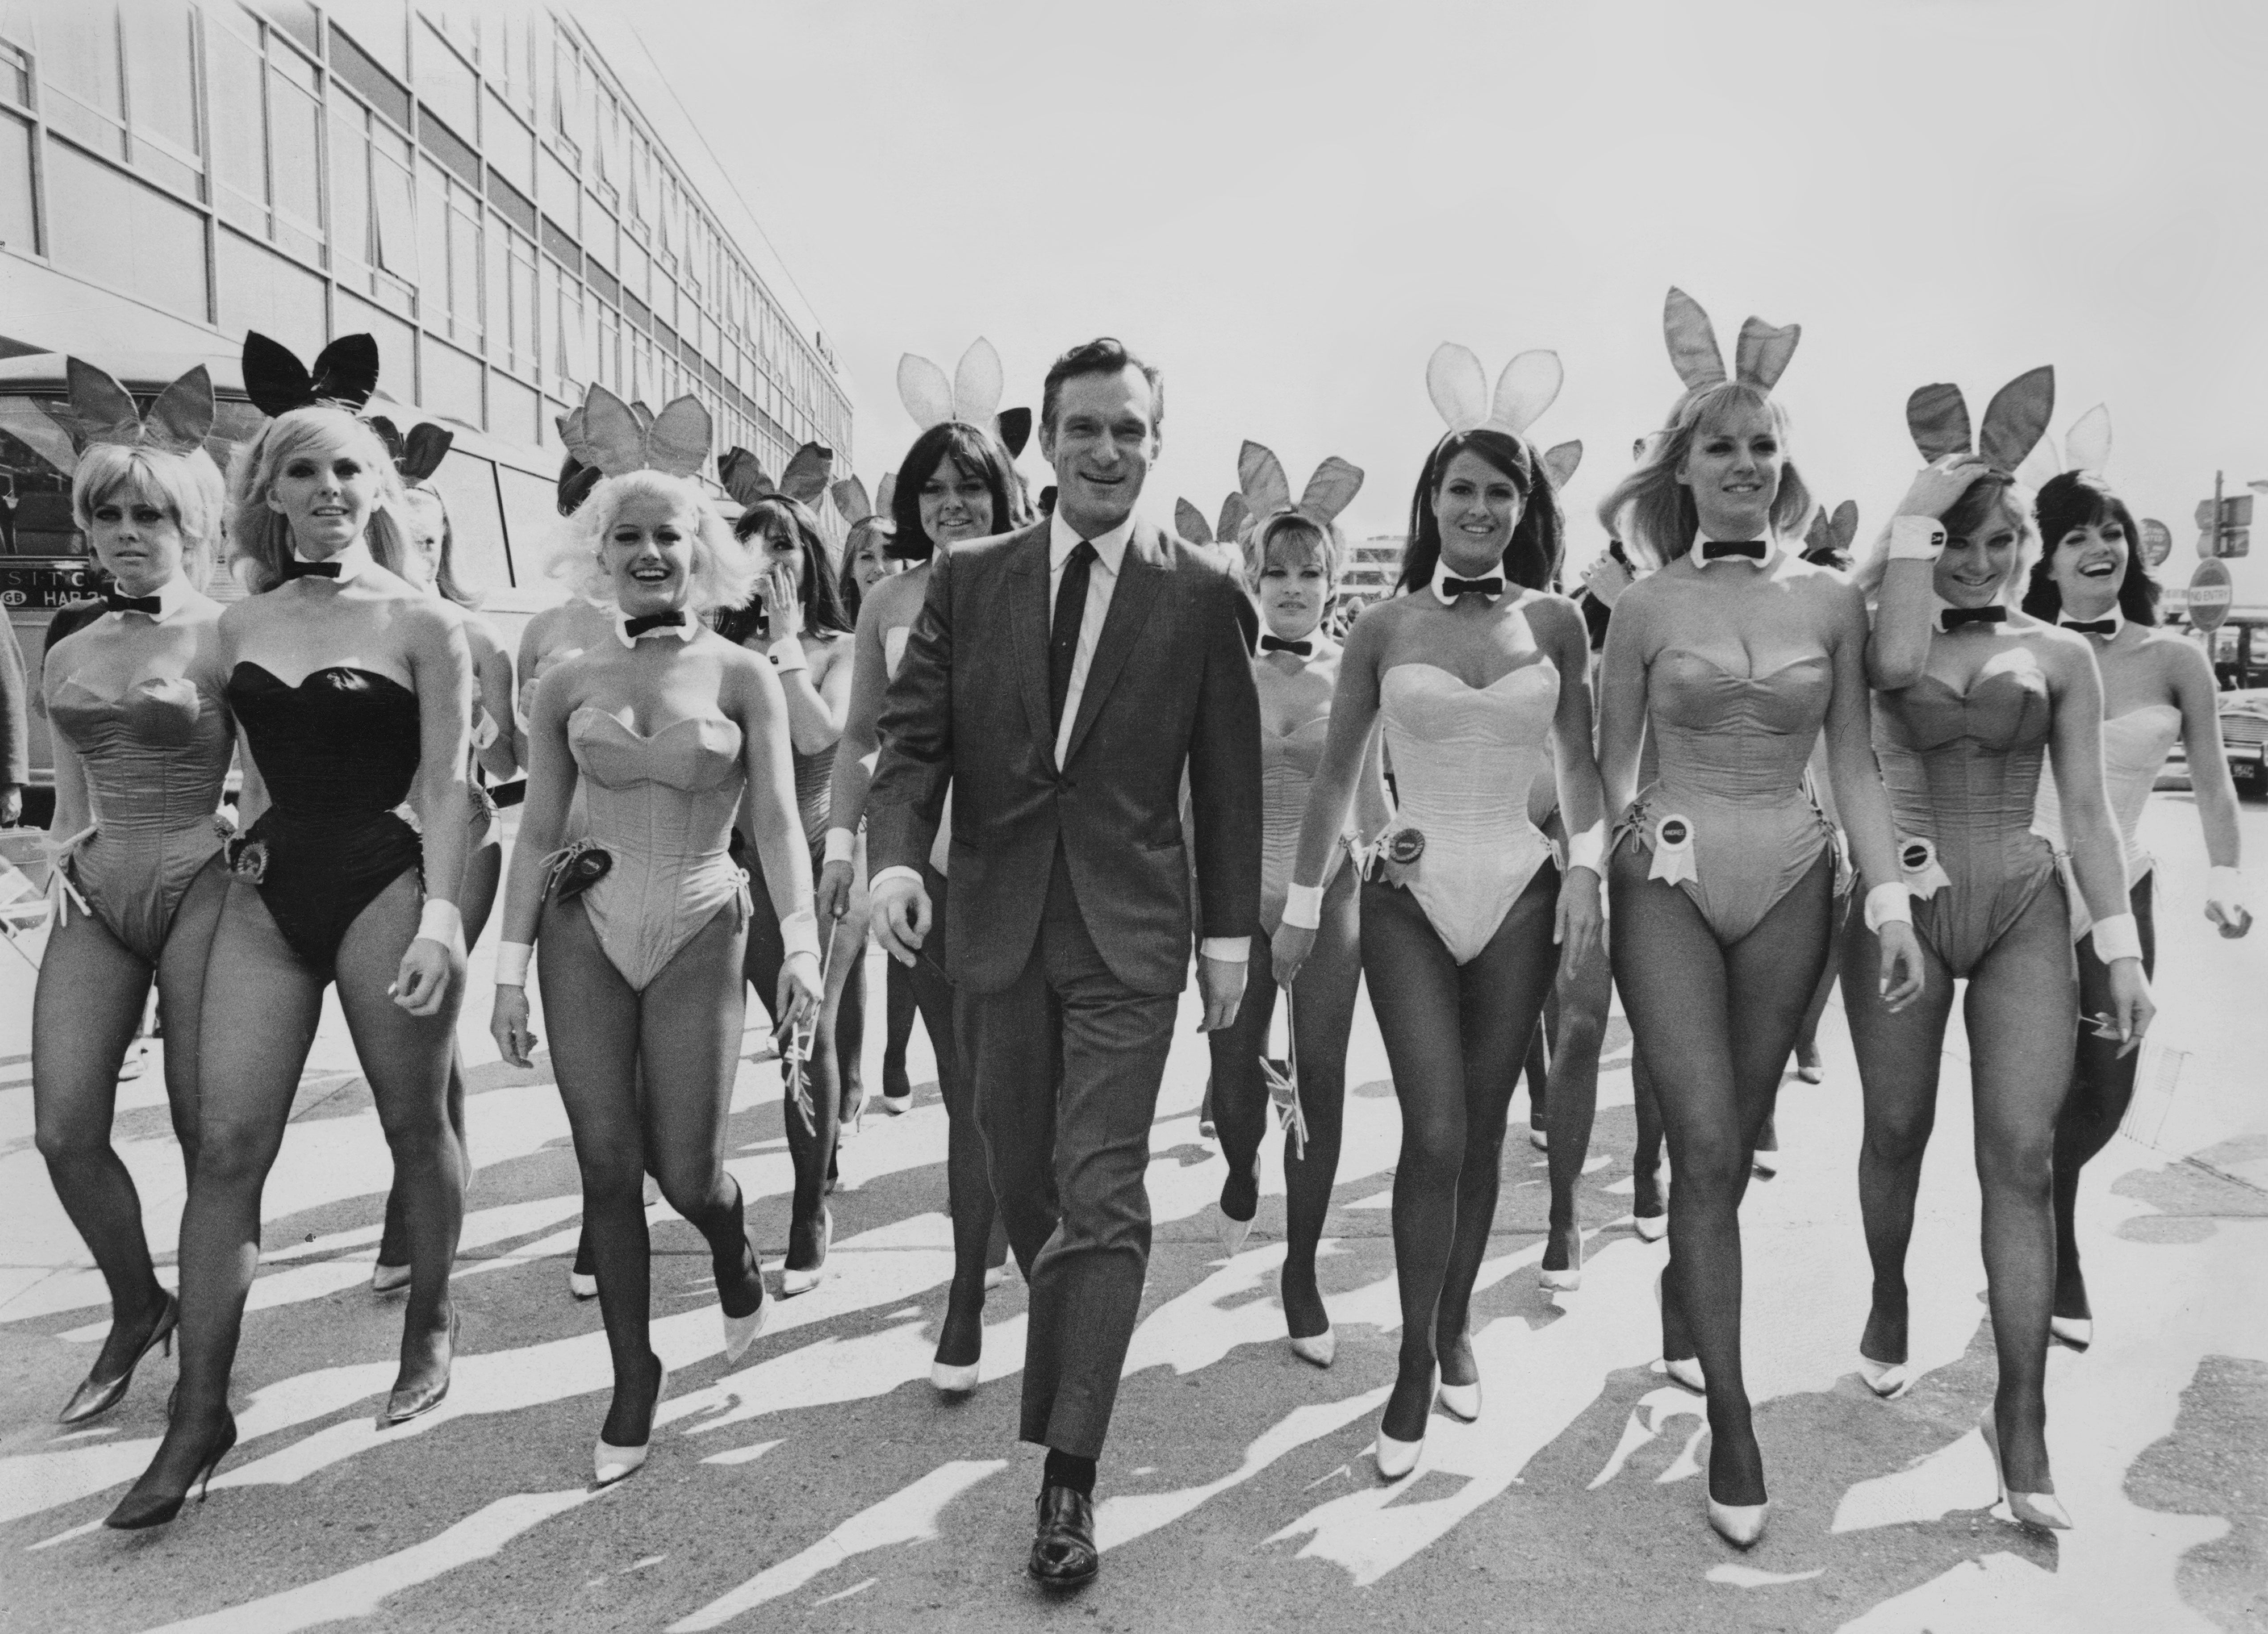 Hugh Hefner arrives at Heathrow Airport (then known as London Airport) on 26 June 1966 with an entourage of Playboy bunnies